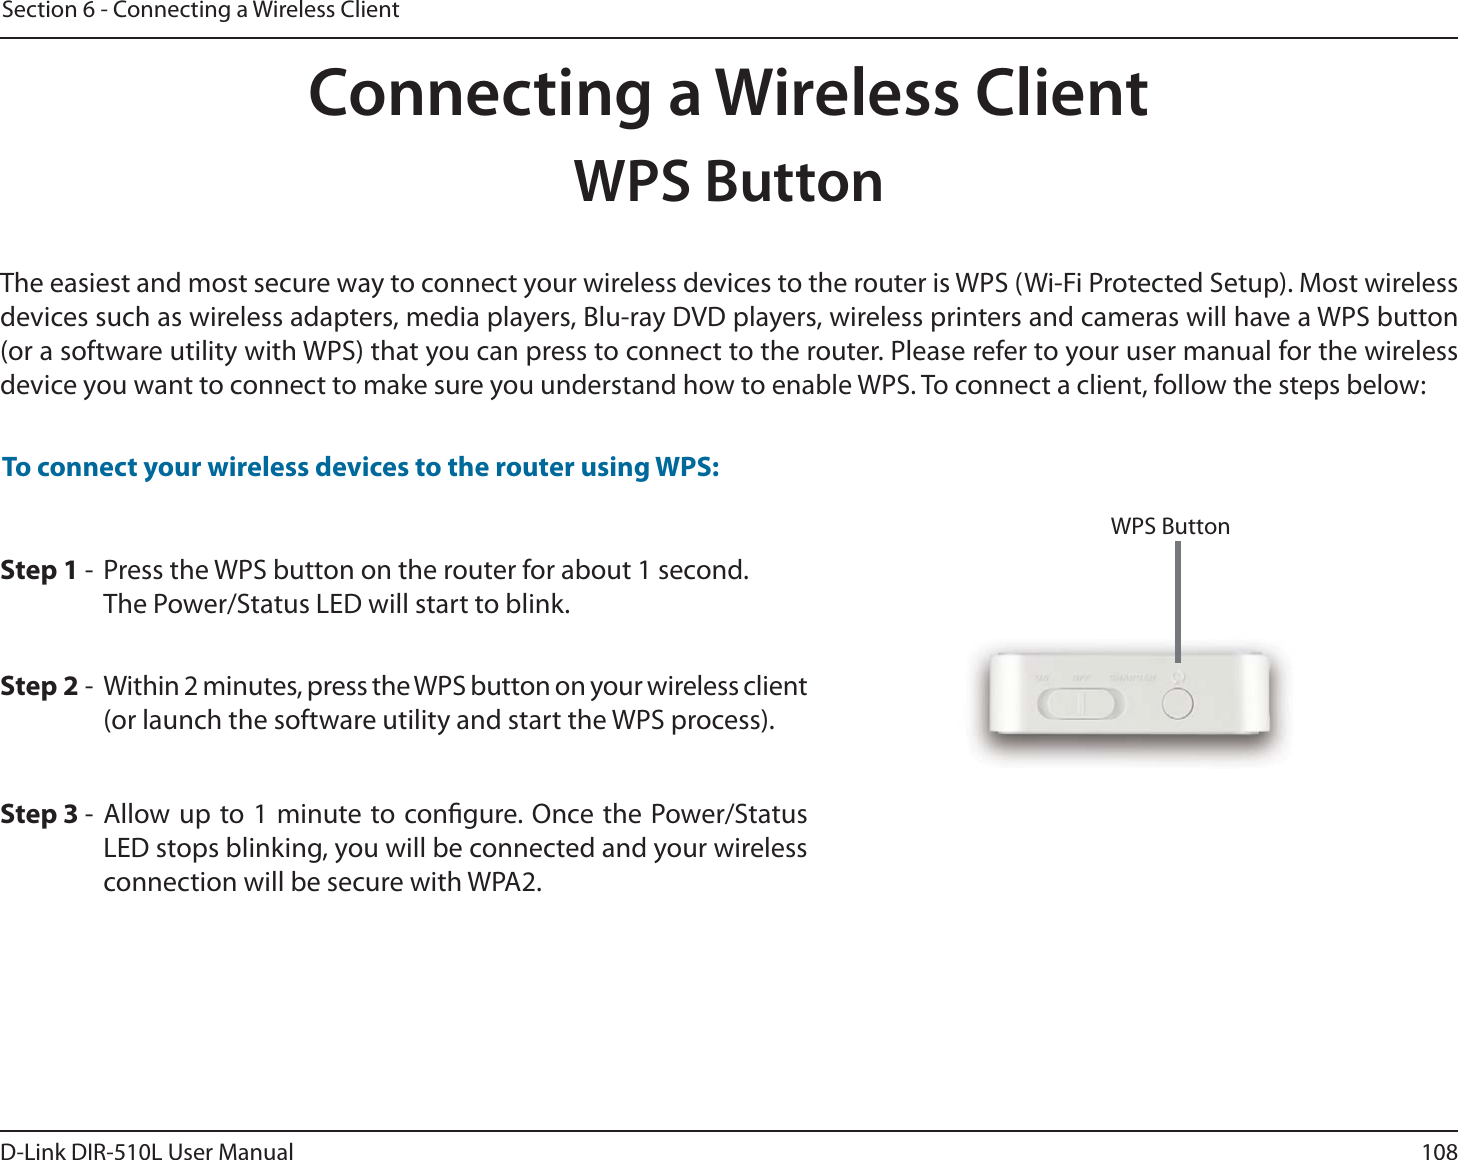 108D-Link DIR-510L User ManualSection 6 - Connecting a Wireless ClientStep 2 -  Within 2 minutes, press the WPS button on your wireless client (or launch the software utility and start the WPS process).Step 1 -  Press the WPS button on the router for about 1 second. The Power/Status LED will start to blink.Step 3 - Allow up to 1 minute to congure. Once the Power/Status LED stops blinking, you will be connected and your wireless connection will be secure with WPA2.To connect your wireless devices to the router using WPS:Connecting a Wireless ClientWPS ButtonThe easiest and most secure way to connect your wireless devices to the router is WPS (Wi-Fi Protected Setup). Most wireless devices such as wireless adapters, media players, Blu-ray DVD players, wireless printers and cameras will have a WPS button (or a software utility with WPS) that you can press to connect to the router. Please refer to your user manual for the wireless device you want to connect to make sure you understand how to enable WPS. To connect a client, follow the steps below:WPS Button